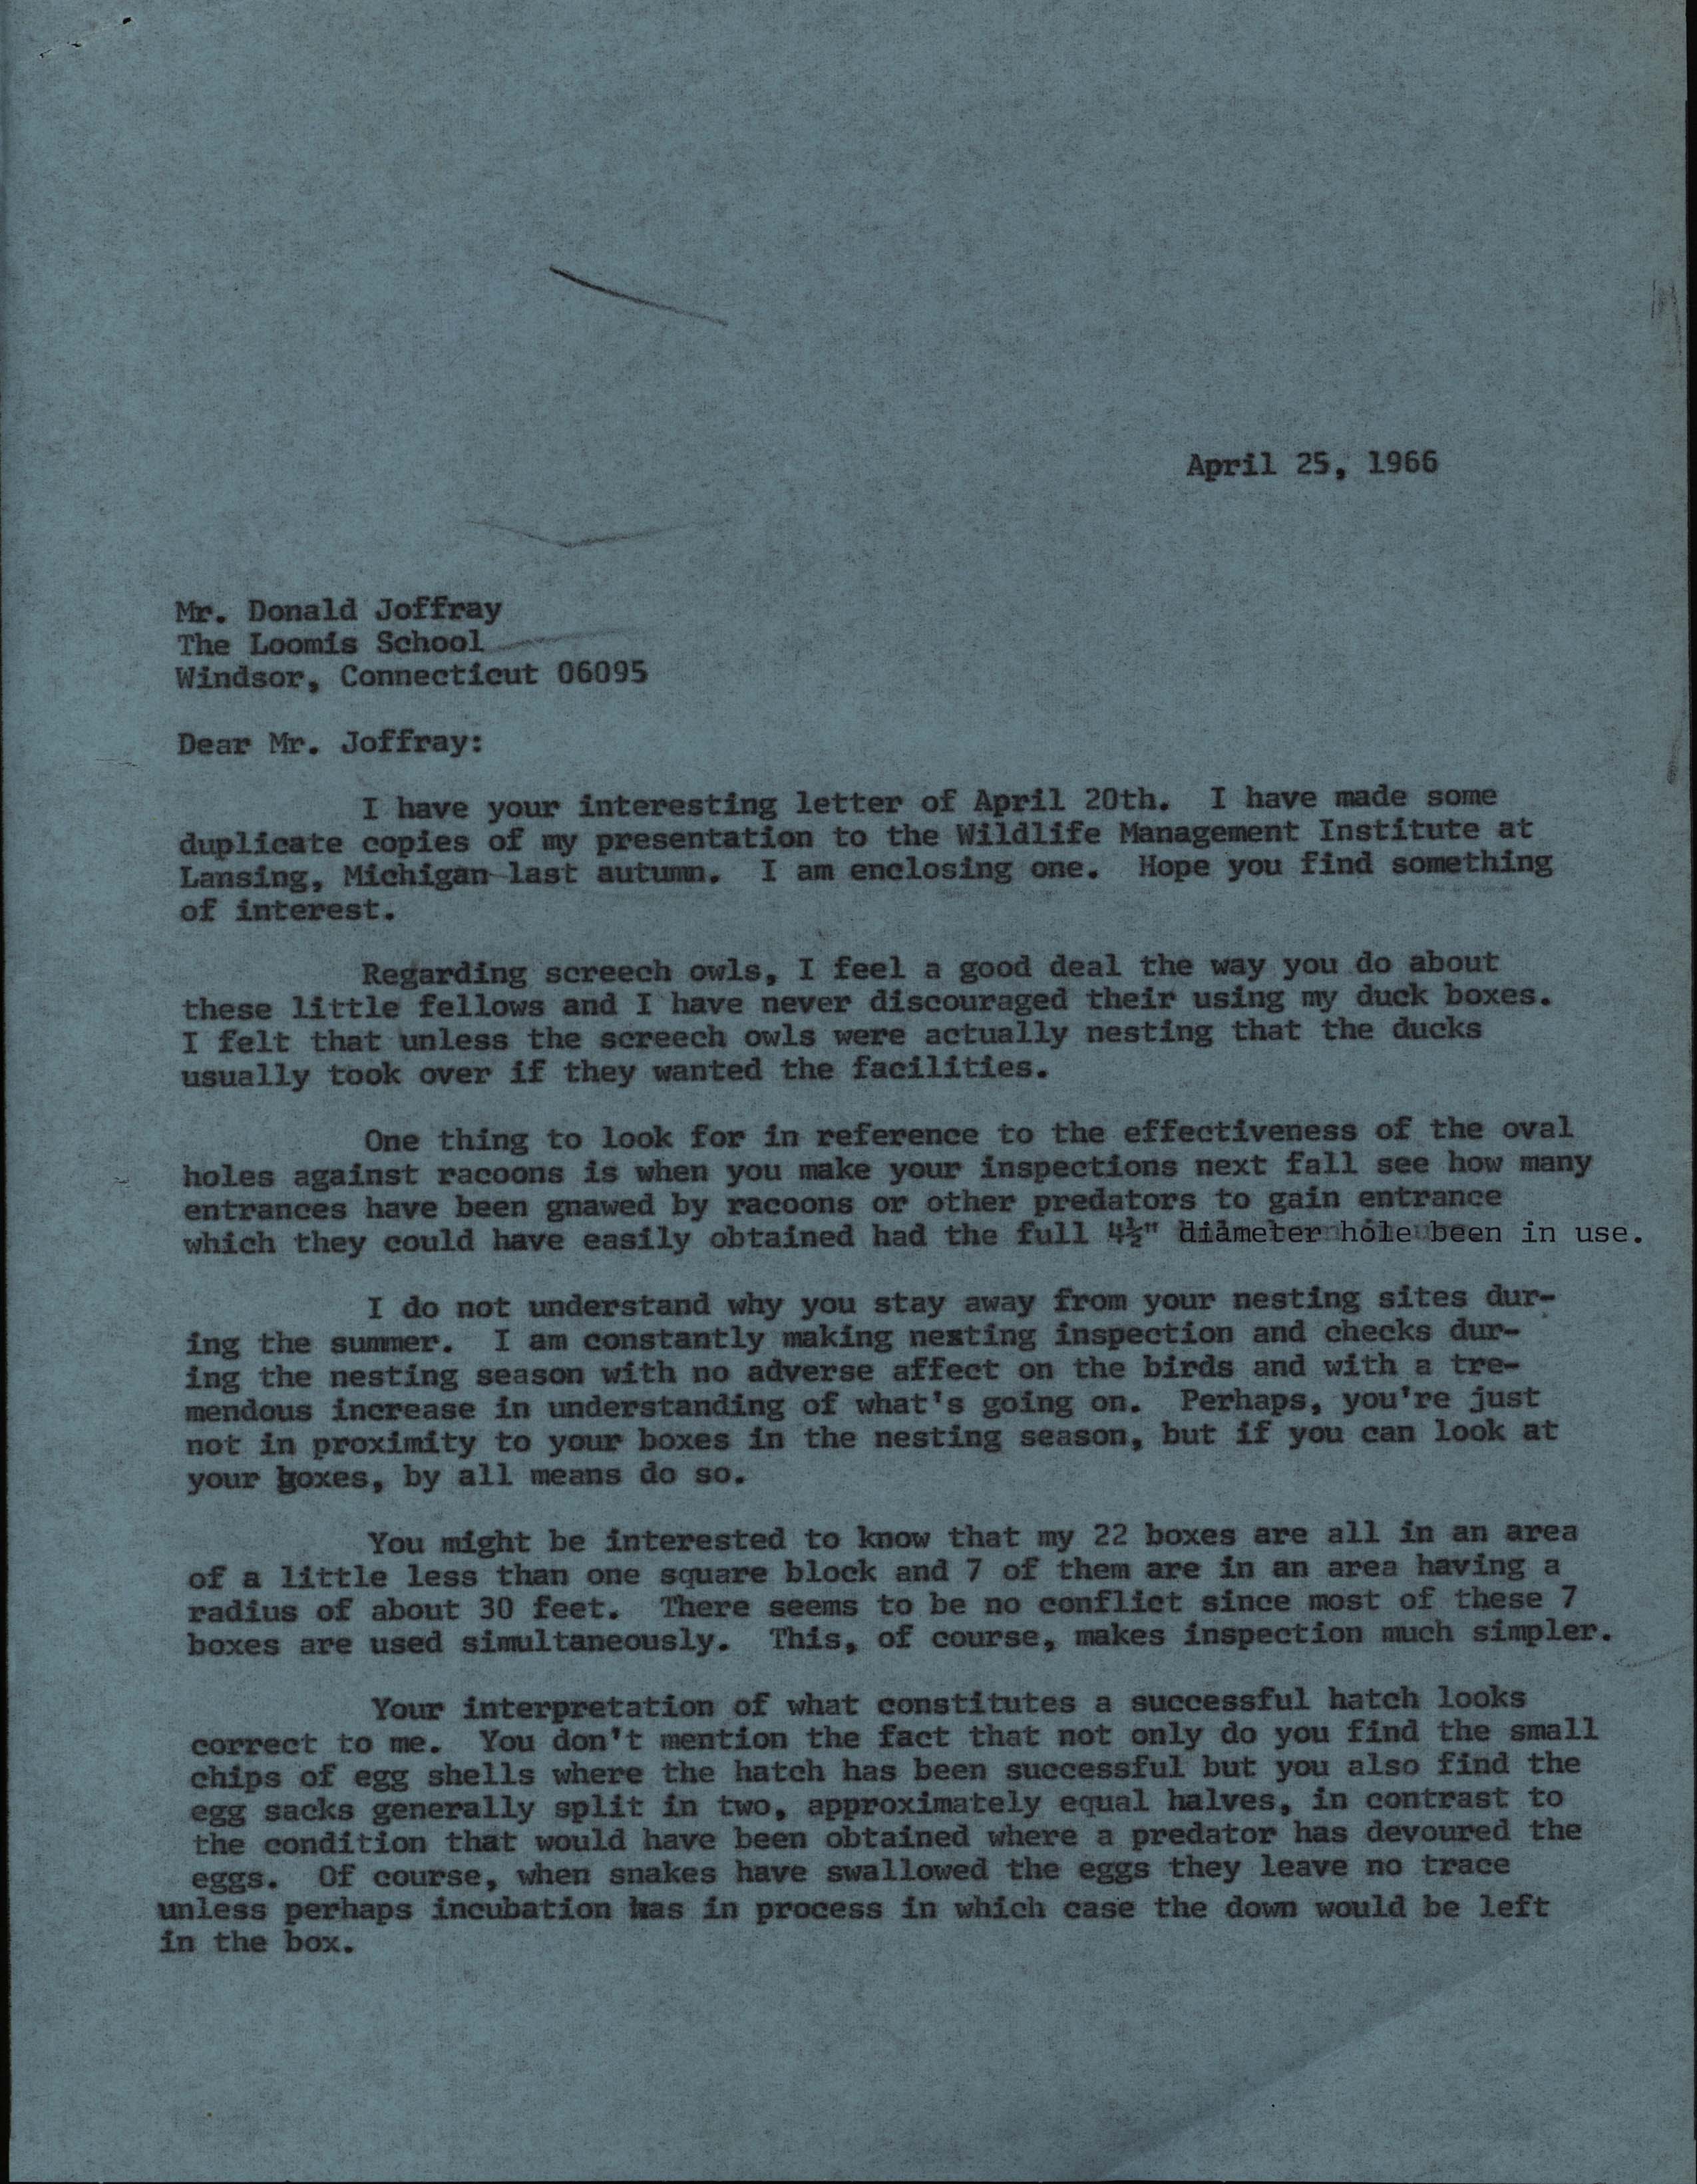 Frederic Leopold letter to Don Joffray regarding Wood Duck houses and nest predation, April 25, 1966